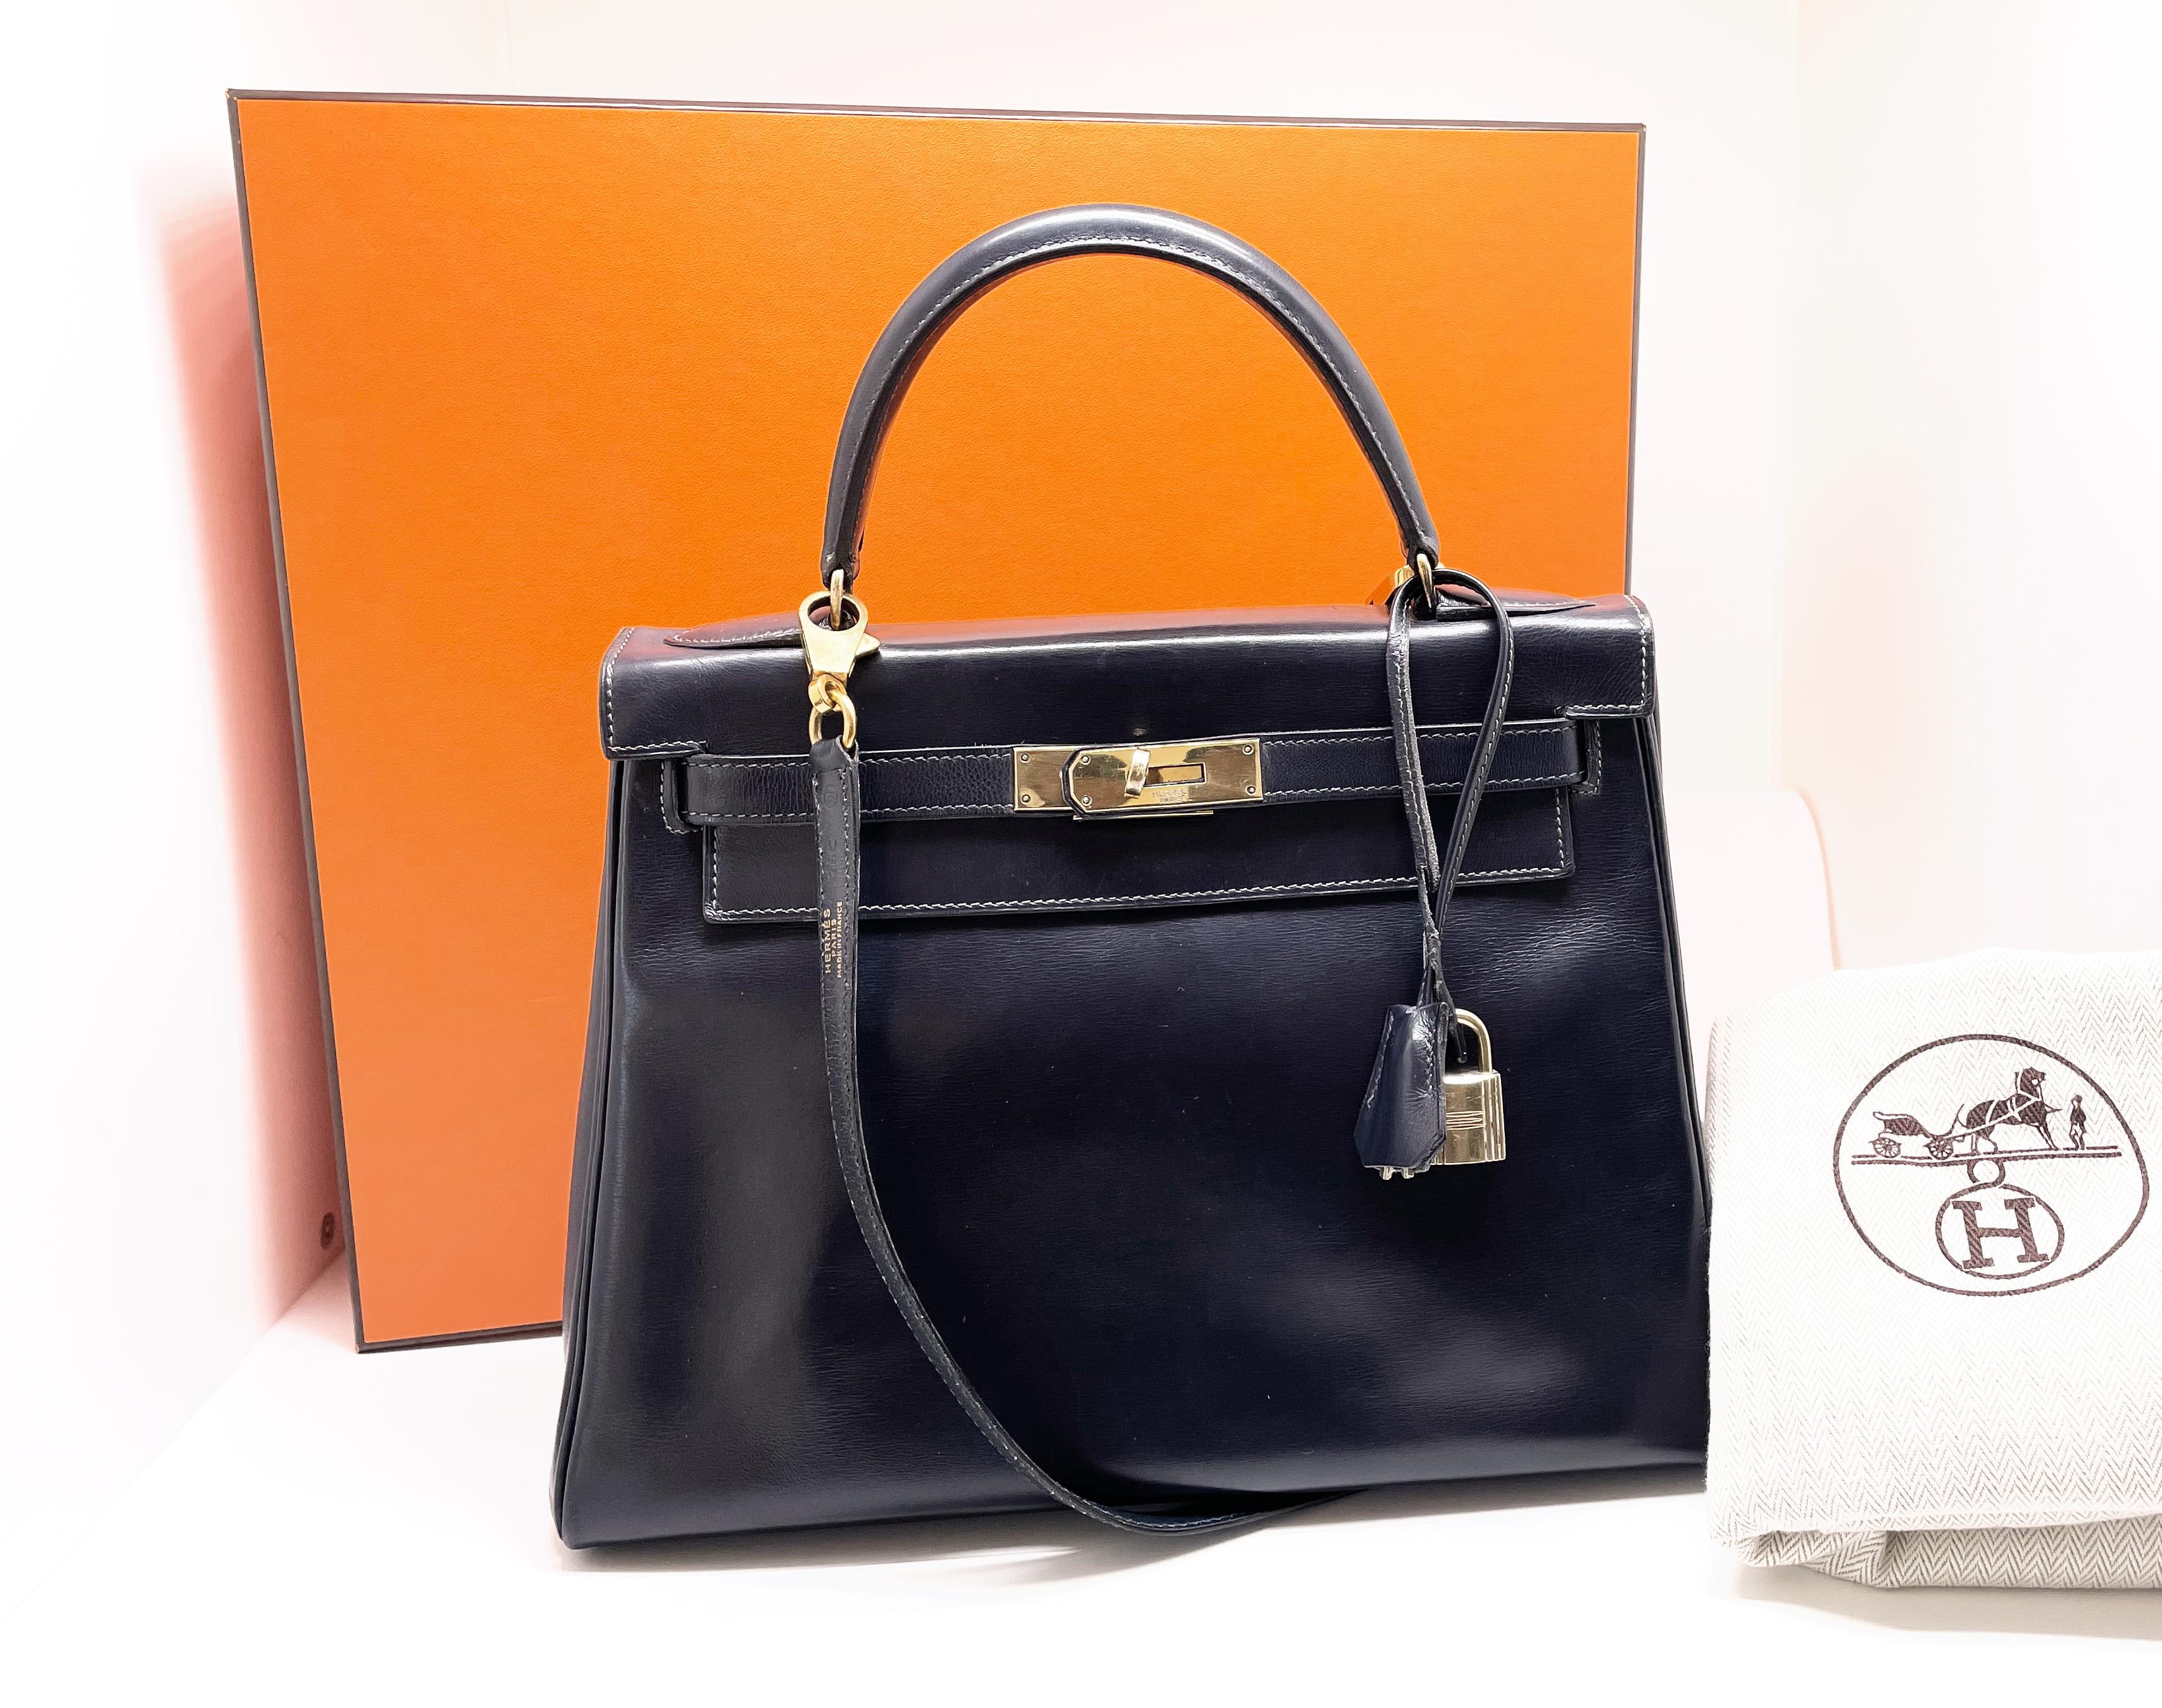 Exceptional​ ​Hermès​ ​Kelly​ ​bag​ ​28​ ​returned​ ​in​ ​navy​ ​box​ ​leather,​ ​gold-plated​ ​metal​ ​trimming,​ ​shoulder strap​ removable​ ​in​ ​marine​ ​box​ ​leather,​ ​handle​ ​in​ ​marine​ ​box​ ​leather​ ​allowing​ ​carrying​ ​in the hand​